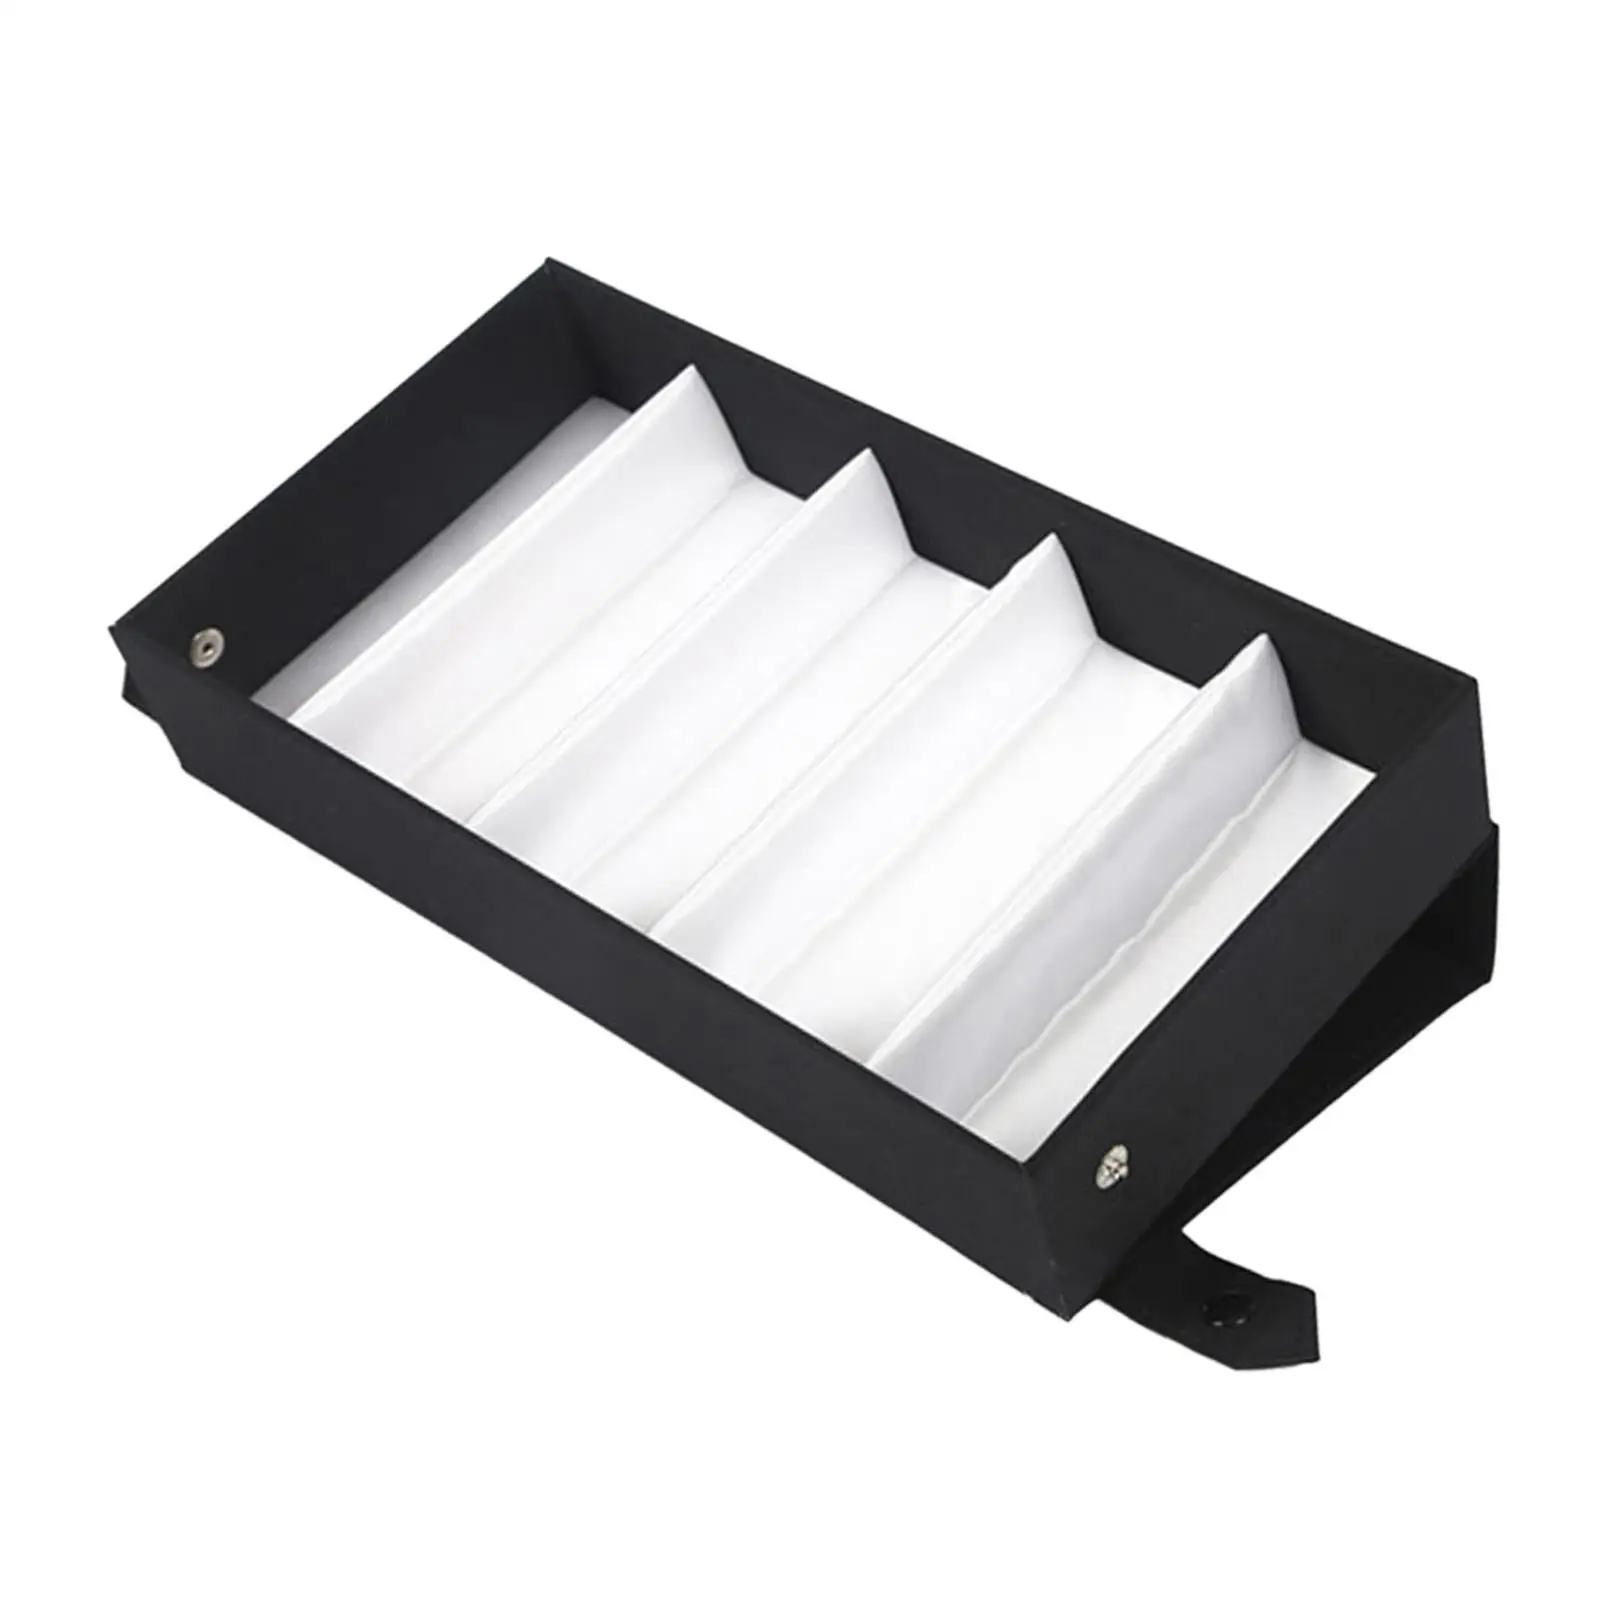 Glasses Storage Box Tray Protective Box Portable Container for Home Use Travel Jewelry